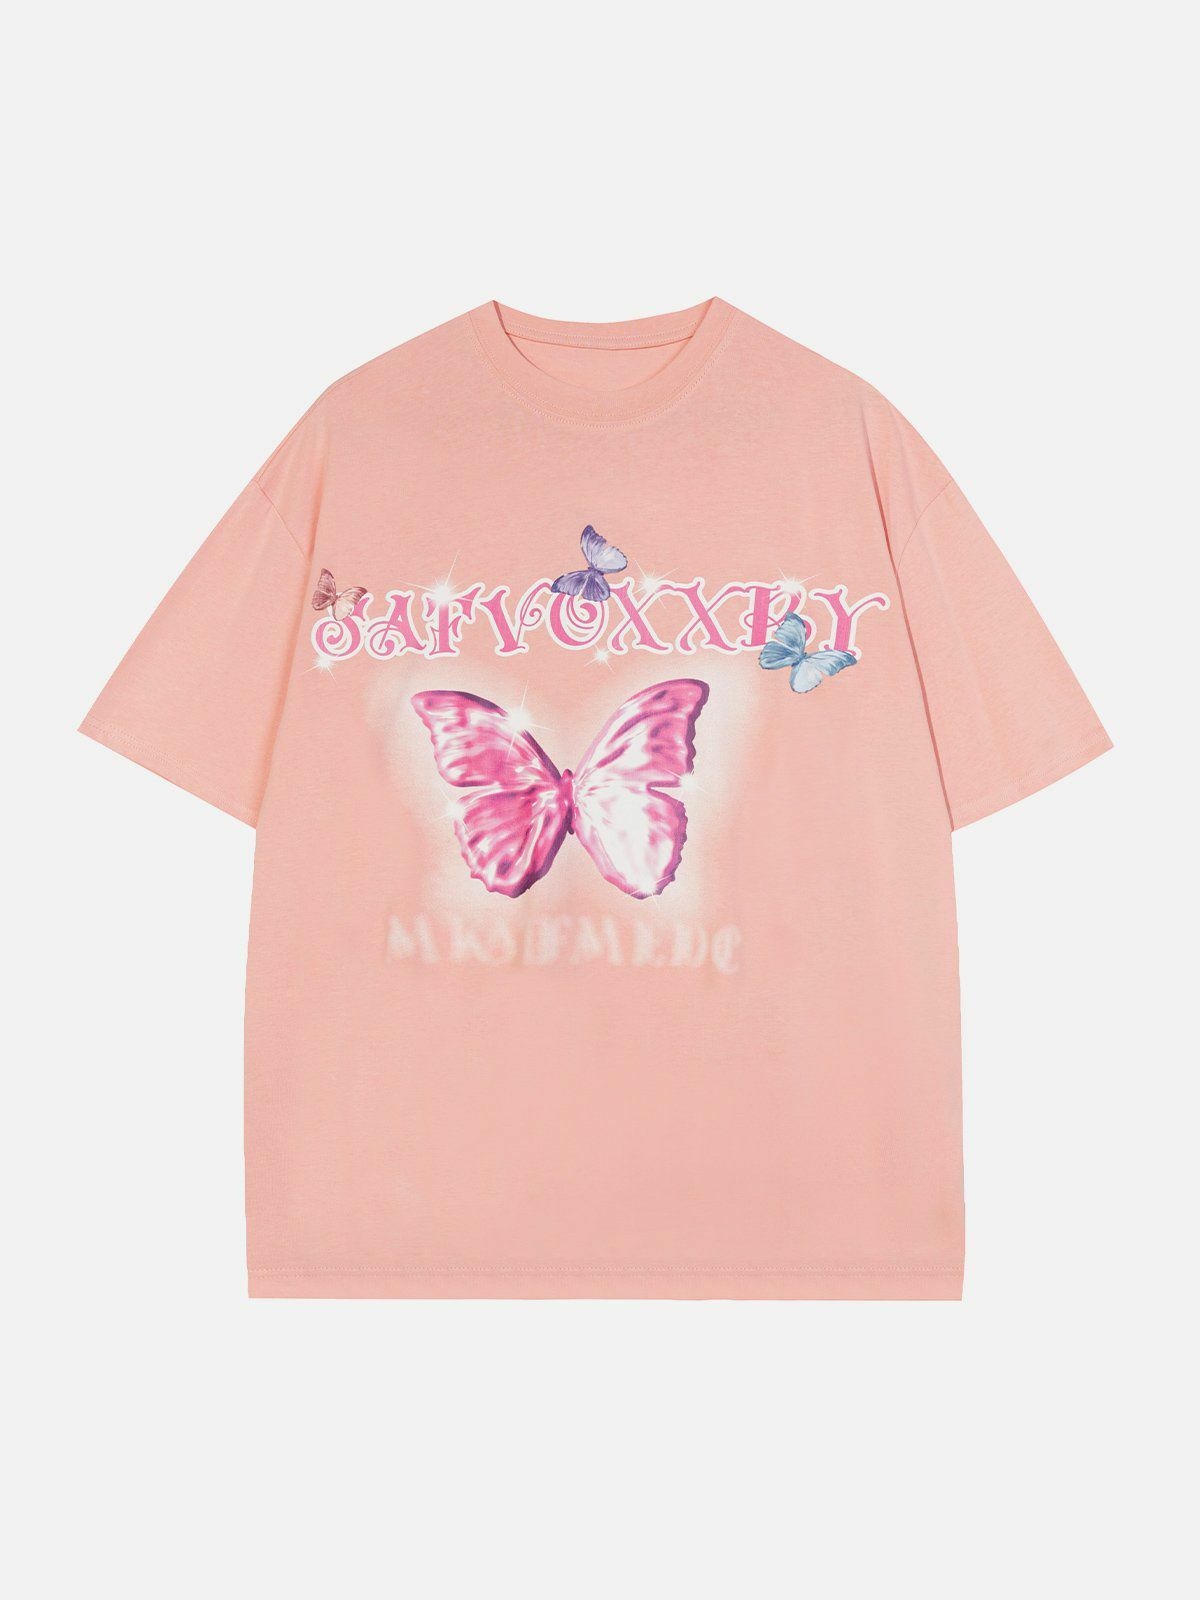 butterfly graphic tee edgy retro streetwear essential 6309